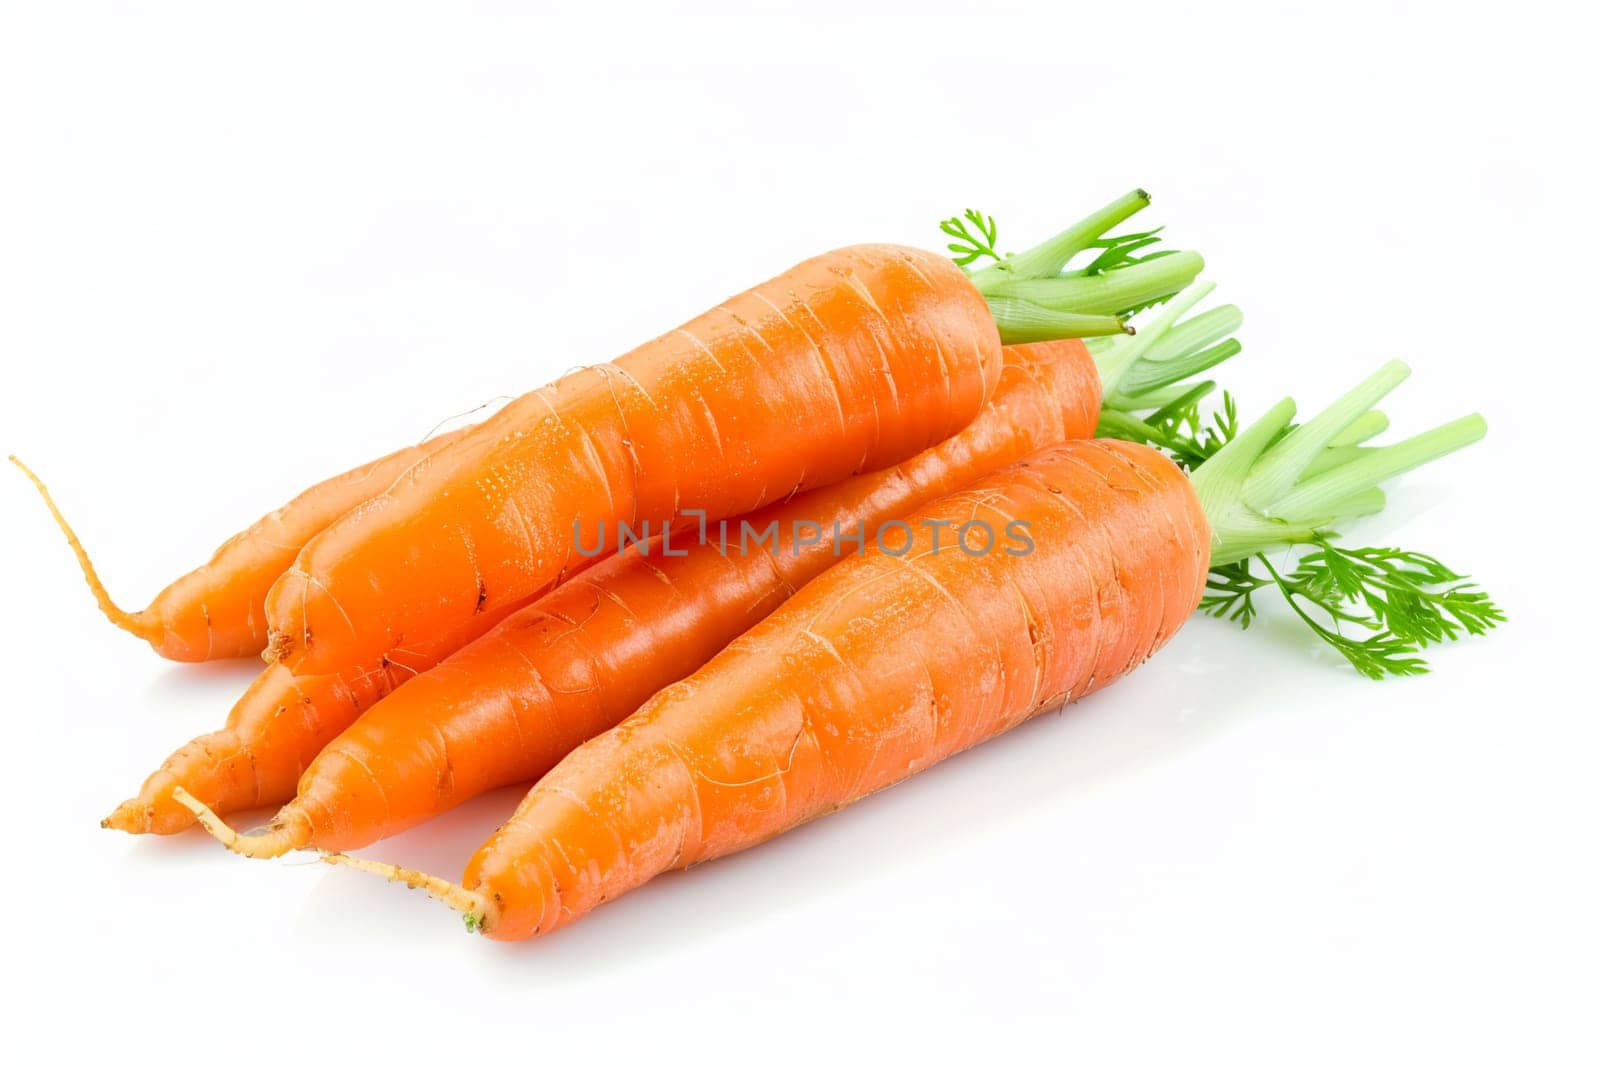 Three fresh, organic carrots, vibrantly colored, isolated over white background, ideal for healthy cooking and dietary needs.